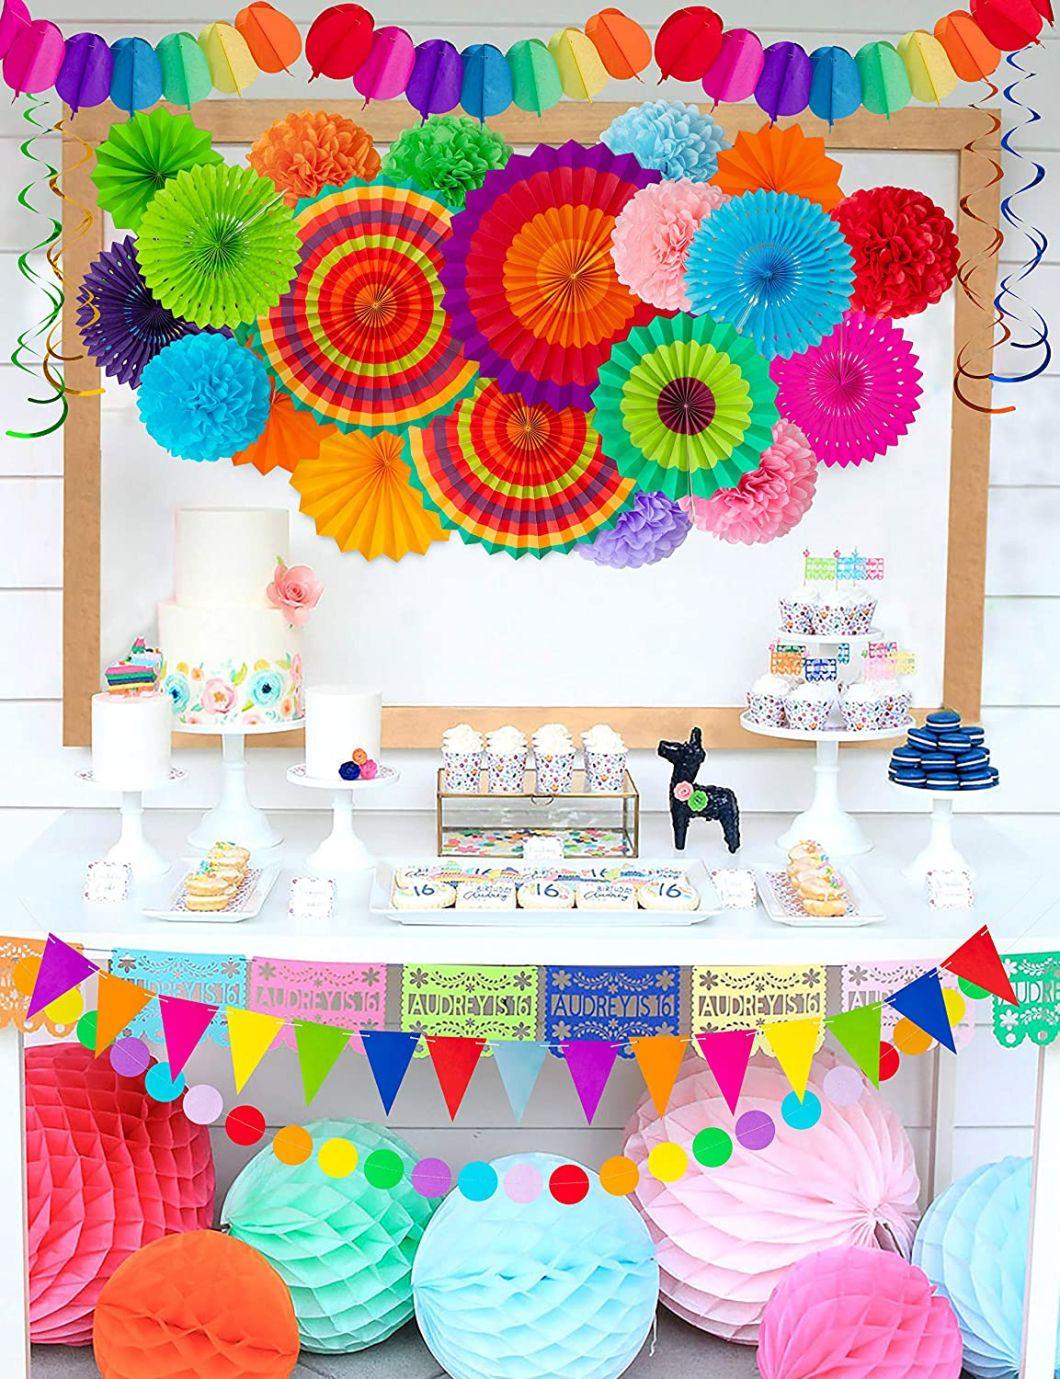 Wholesale 35 Piece Carnival Paper Fan Party Decorative Set - Cinco De Mayo Pompons, Pennants, Garland Ropes, Banners, Hanging Whirlpool Decor Supplies